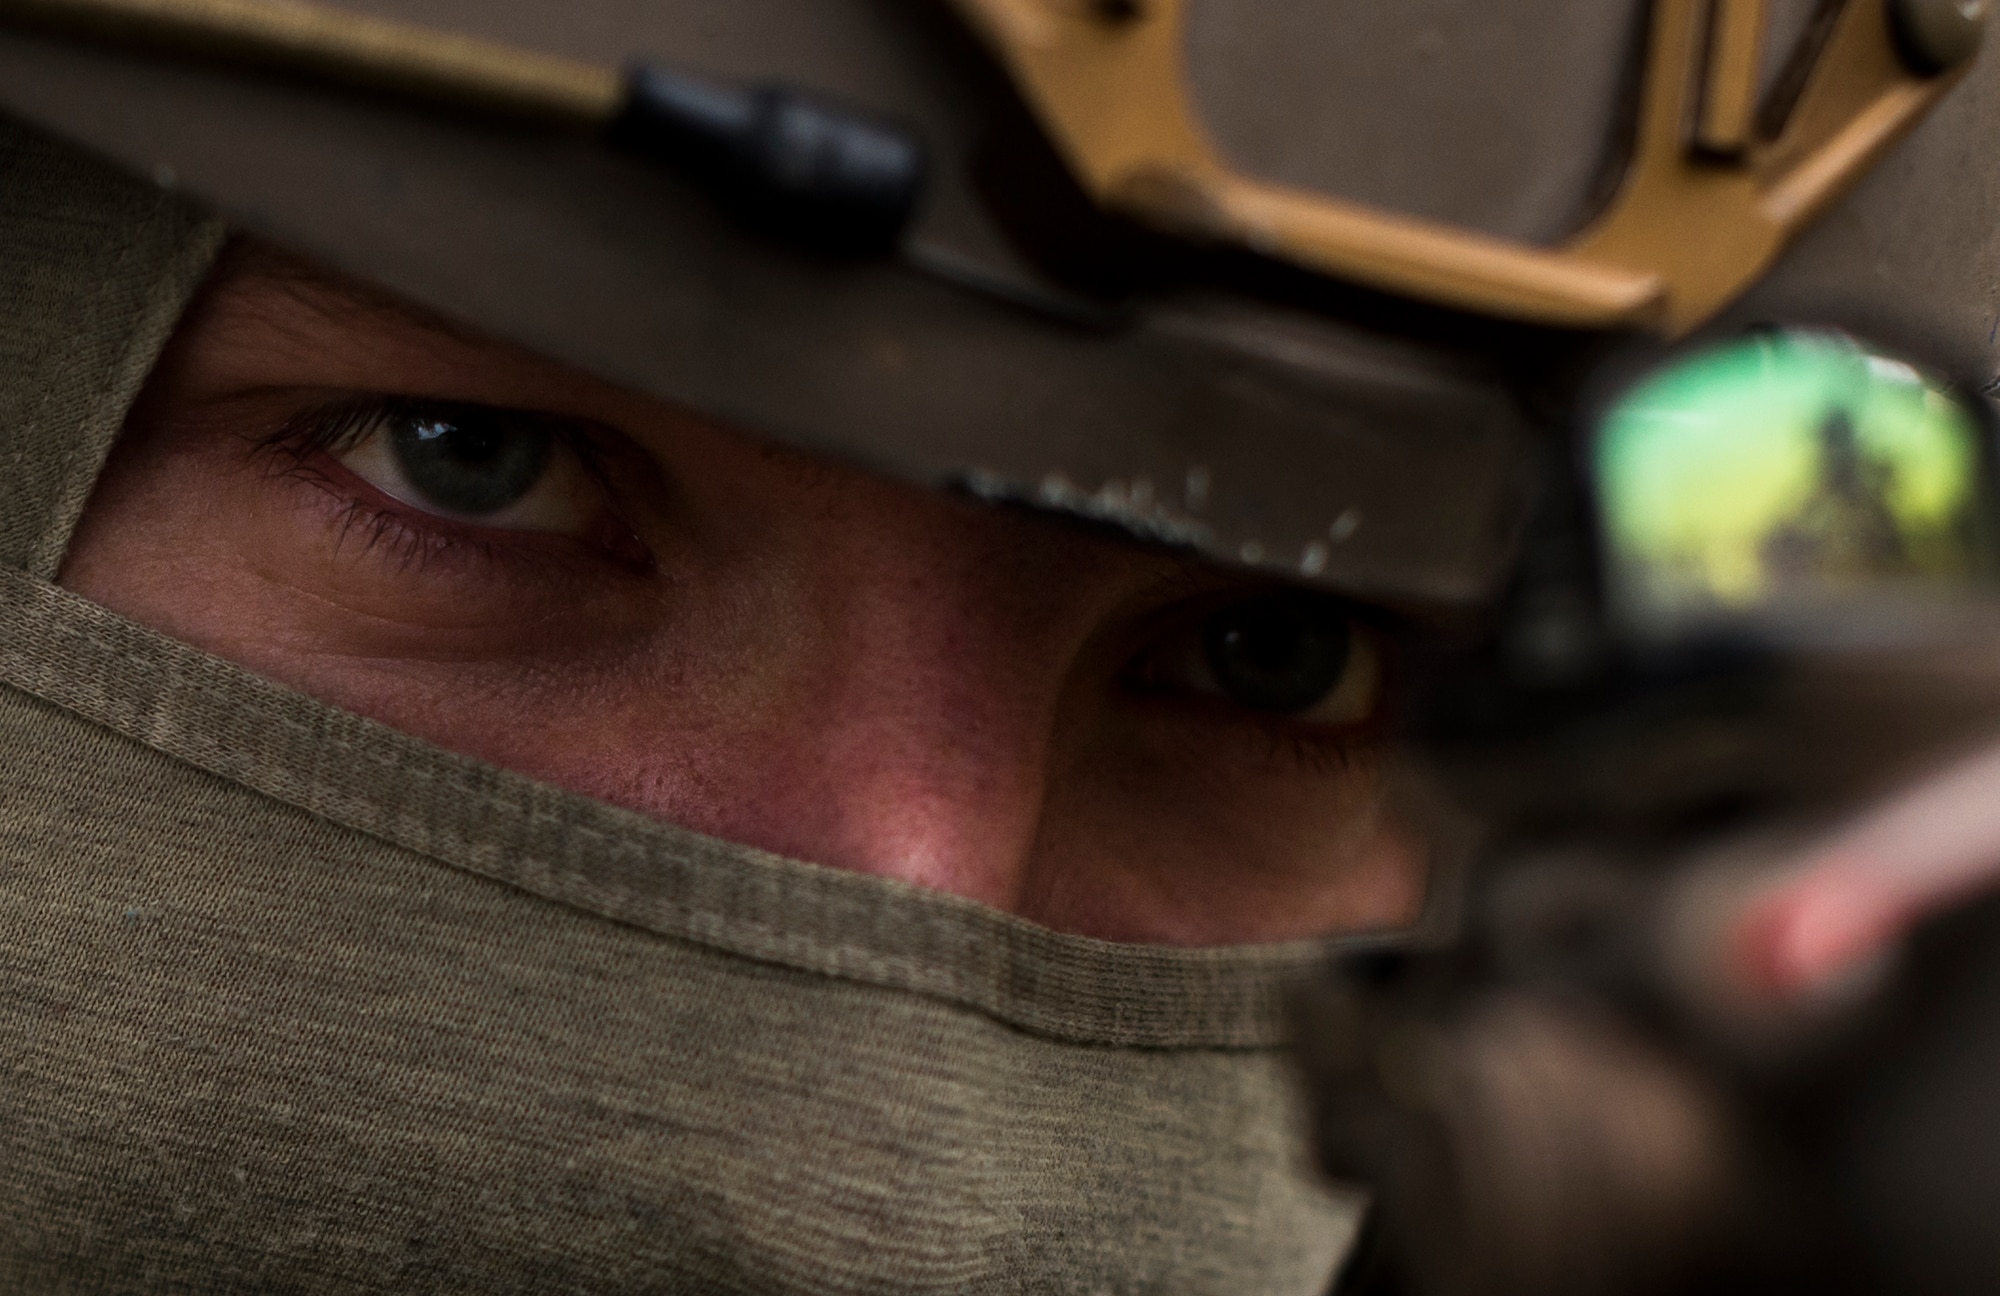 Senior Airman Martin Dietrich, 2nd Air Support Operations Squadron tactical air control party member, looks through the scope on his weapon during training at U.S. Army Garrison Bavaria in Vilseck, Germany, Feb. 8, 2016. The training consisted of Airmen calling in close air support, neutralizing opposing forces and practicing medical evacuation by helicopter. The role of an ASOS Airman is to be the subject matter expert on available air capabilities are for the ground commander. (U.S. Air Force photo/Senior Airman Jonathan Stefanko)